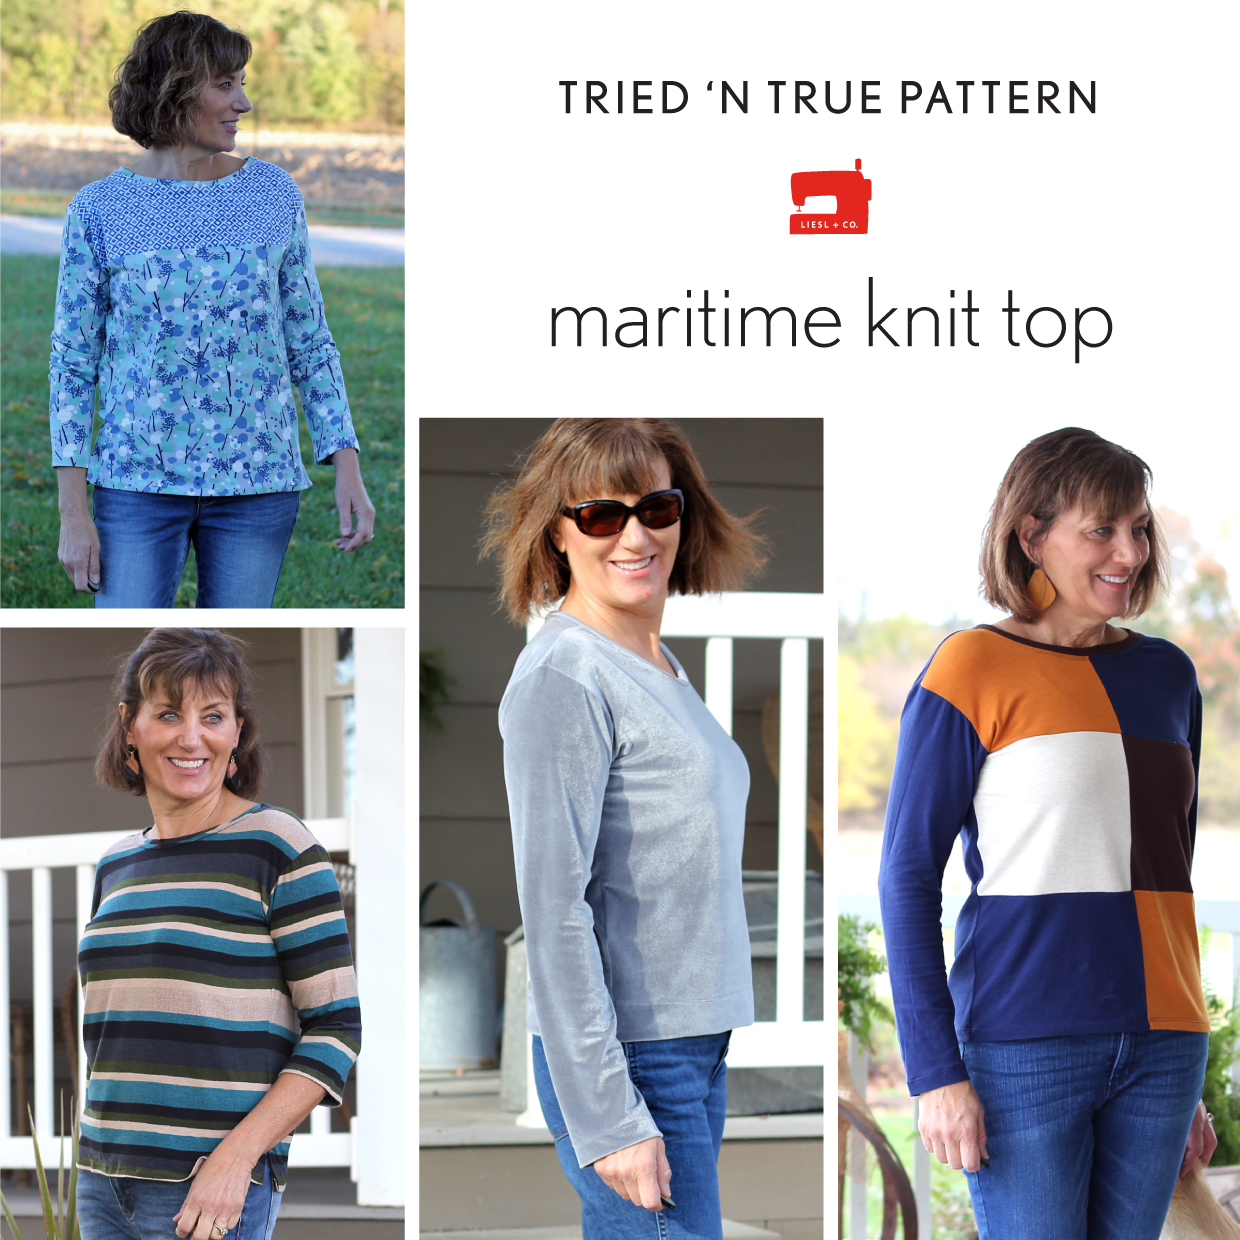 Tried and True Pattern: Liesl + Co. Maritime Knit Top | Blog | Oliver + S